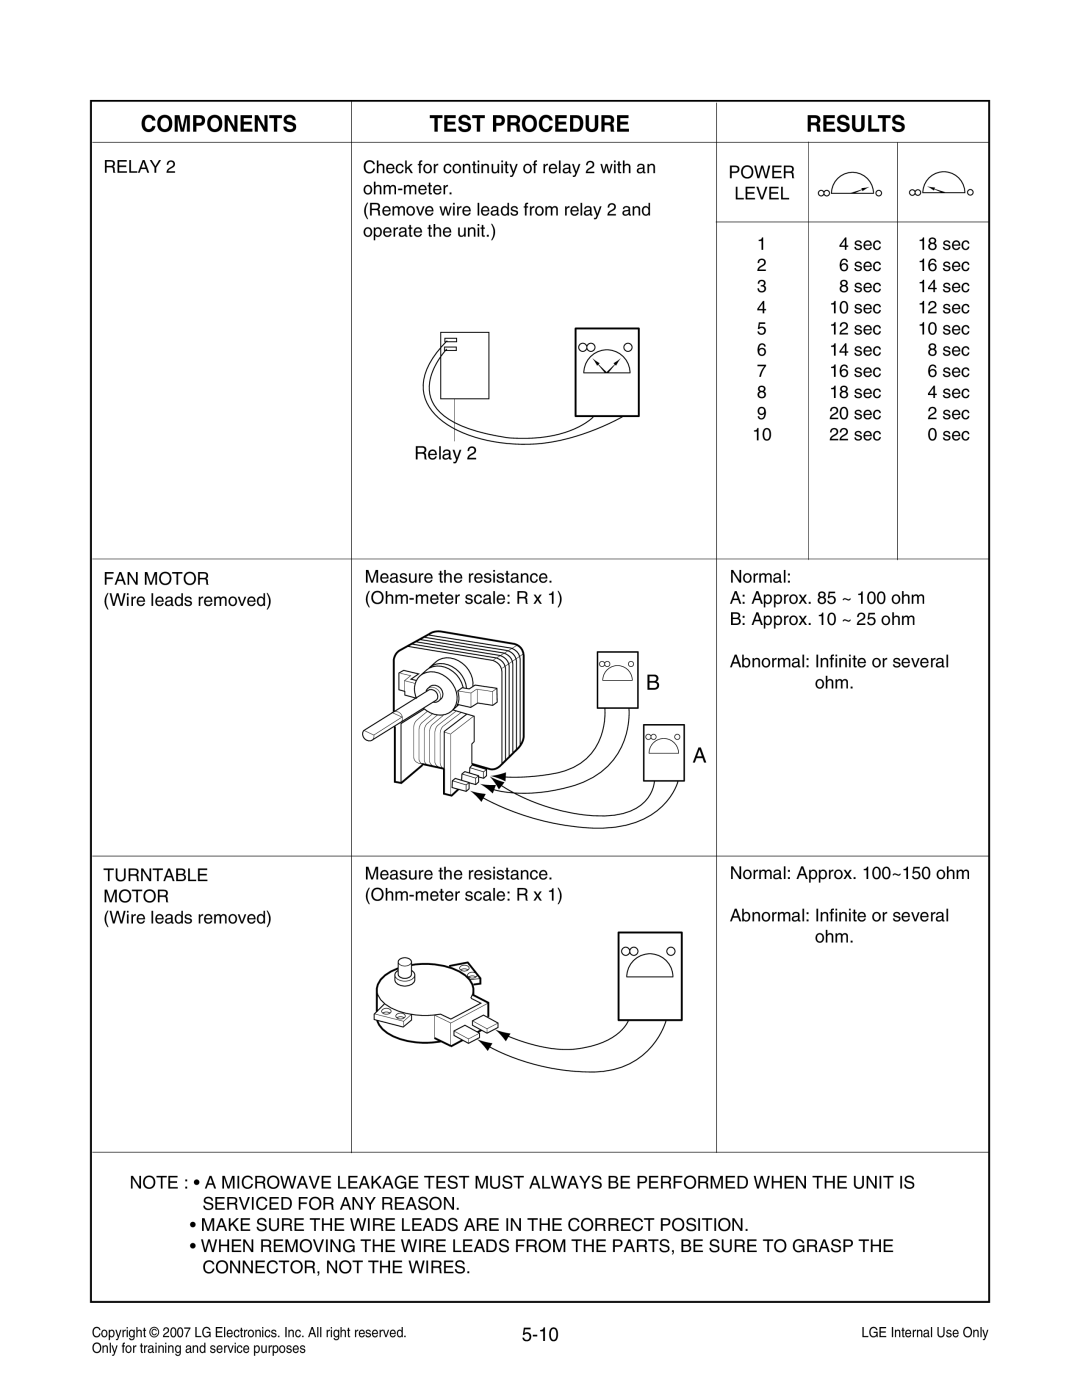 LG Electronics MS3447GRS service manual 5-10, Relay, Components, Test Procedure, Results 